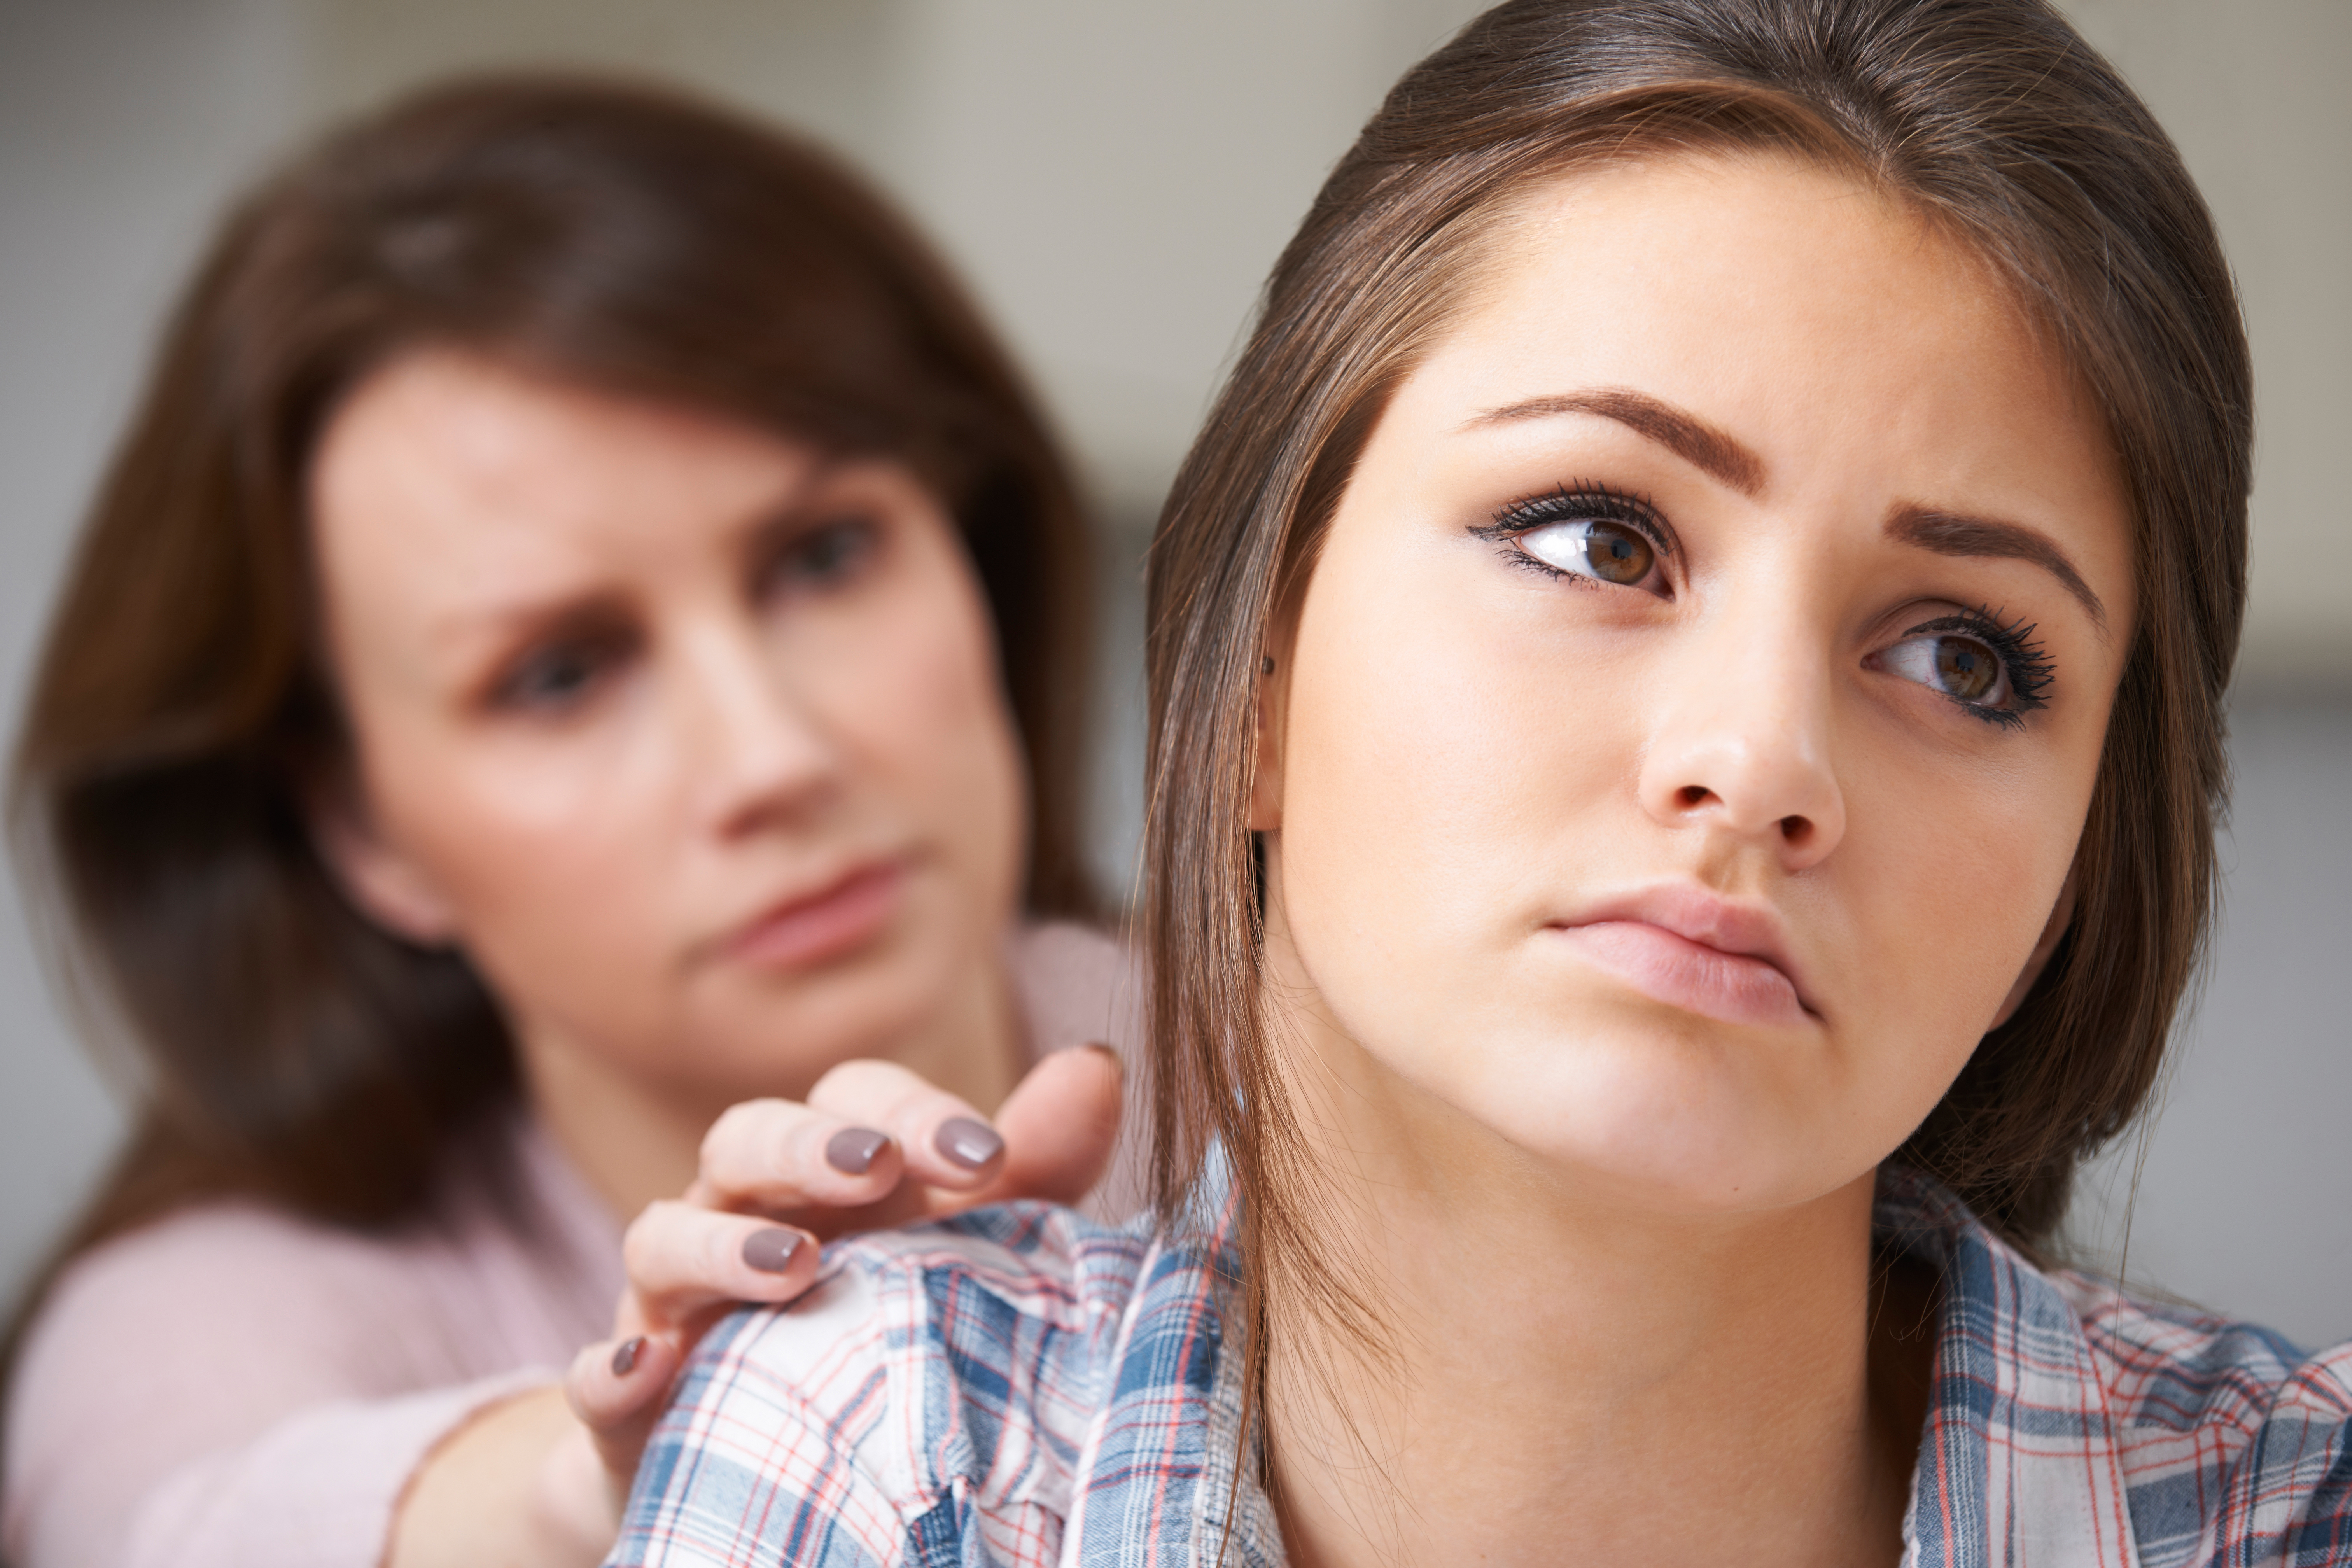 Mother Worried About Unhappy Teenage Daughter